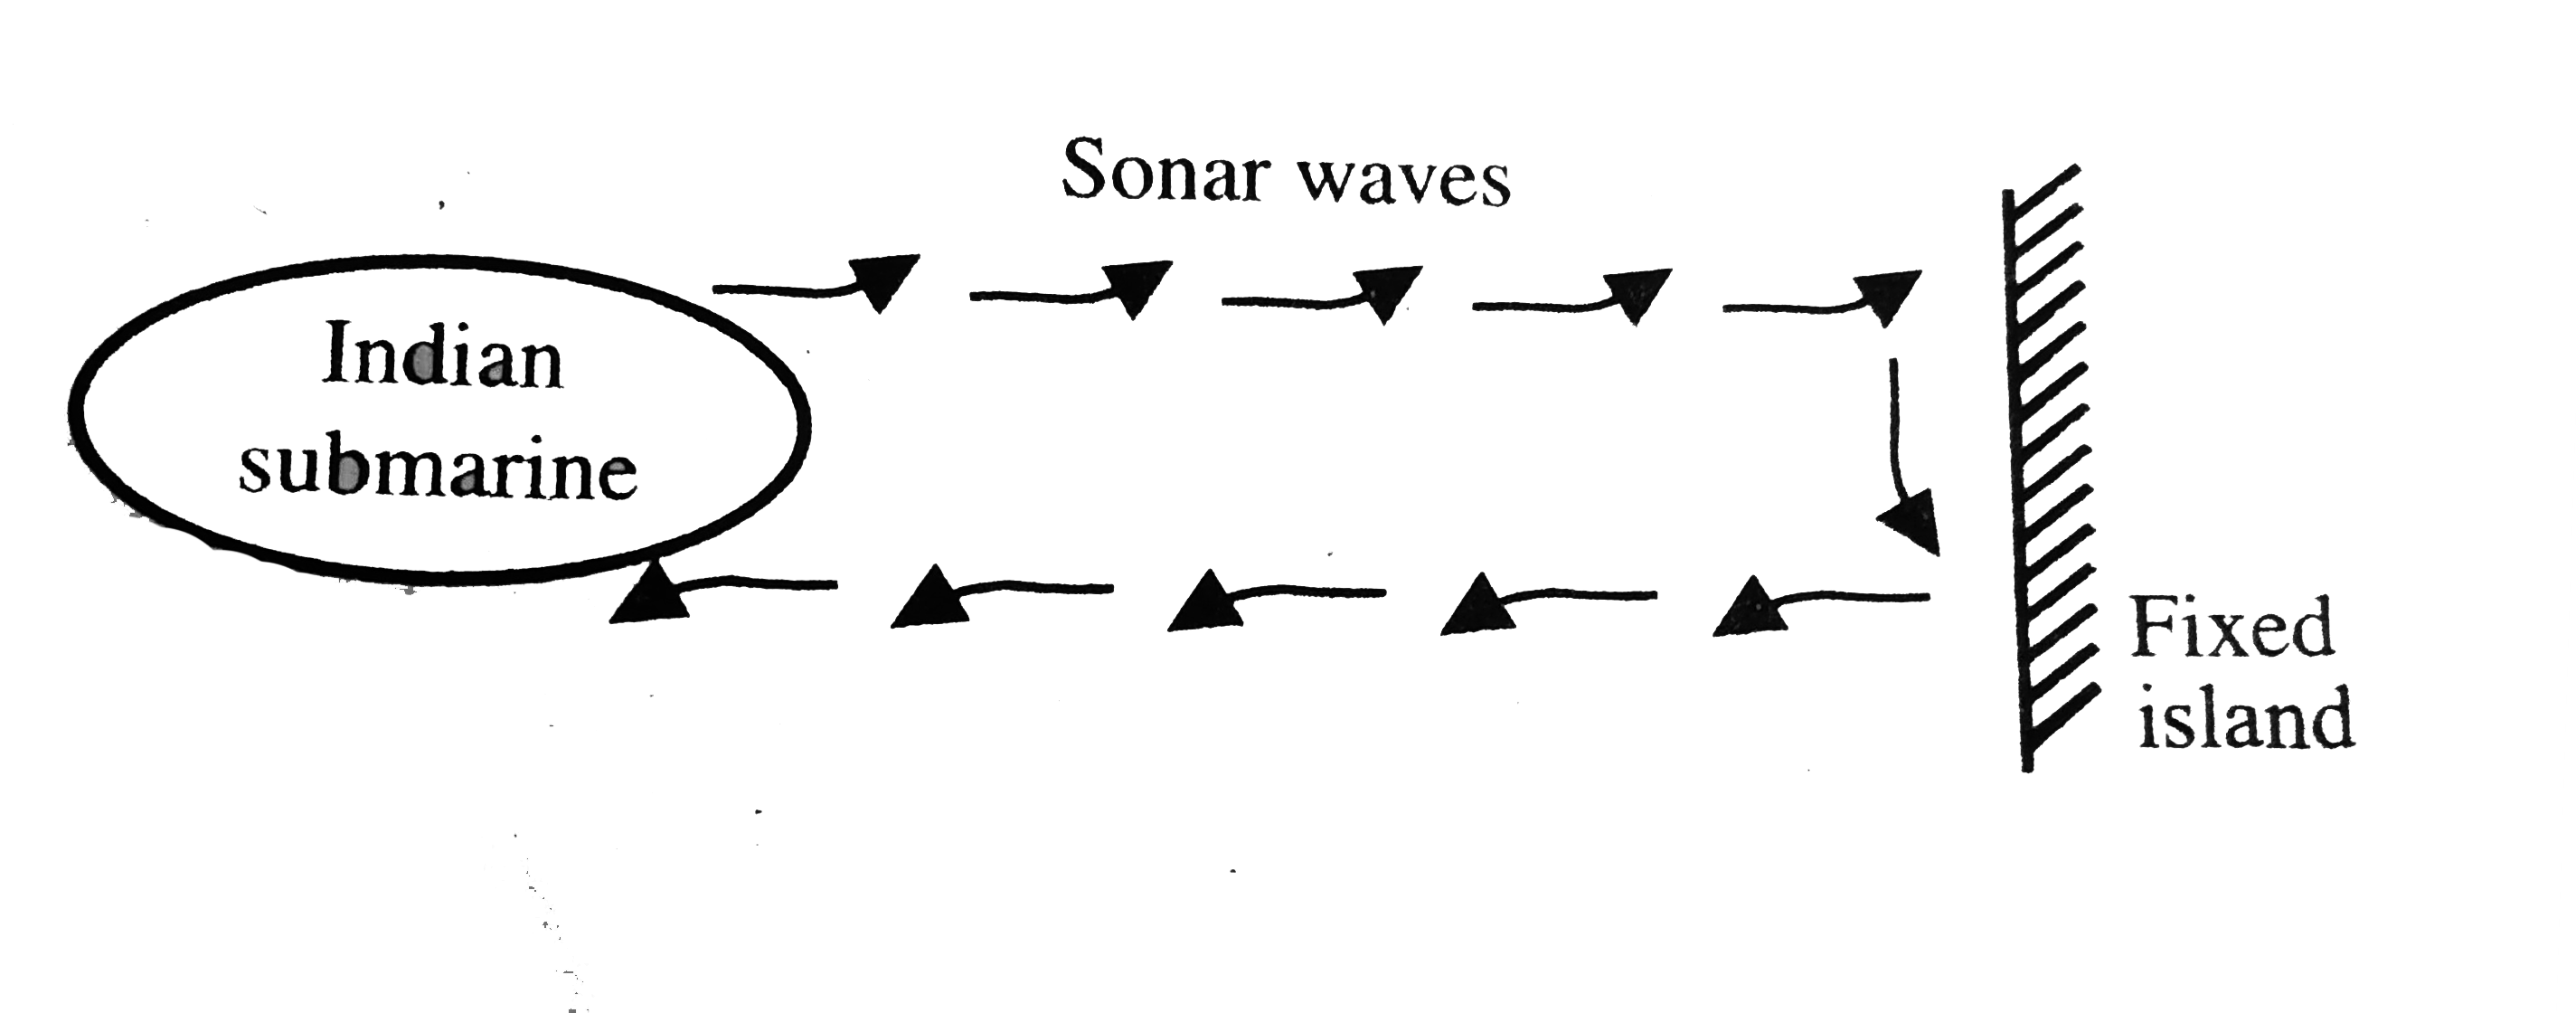 An indian submarine is moving in the Arabian sea with constant velocity. To detect enemy it sends out sonar waves which travel with velocity 1050(m)/(s) in water. Initially the waves are getting reflected from a fixed island and the reflected waves are coming back to submarine. The frequency of reflected waves are detected by the submarine and found to be 10% greater than the sent waves.   Now an enemy ship comes in front, due to which the frequency of reflected waves detected by submarine becomes 21% greater than the sent waves.   Q. The speed of indian submarine is